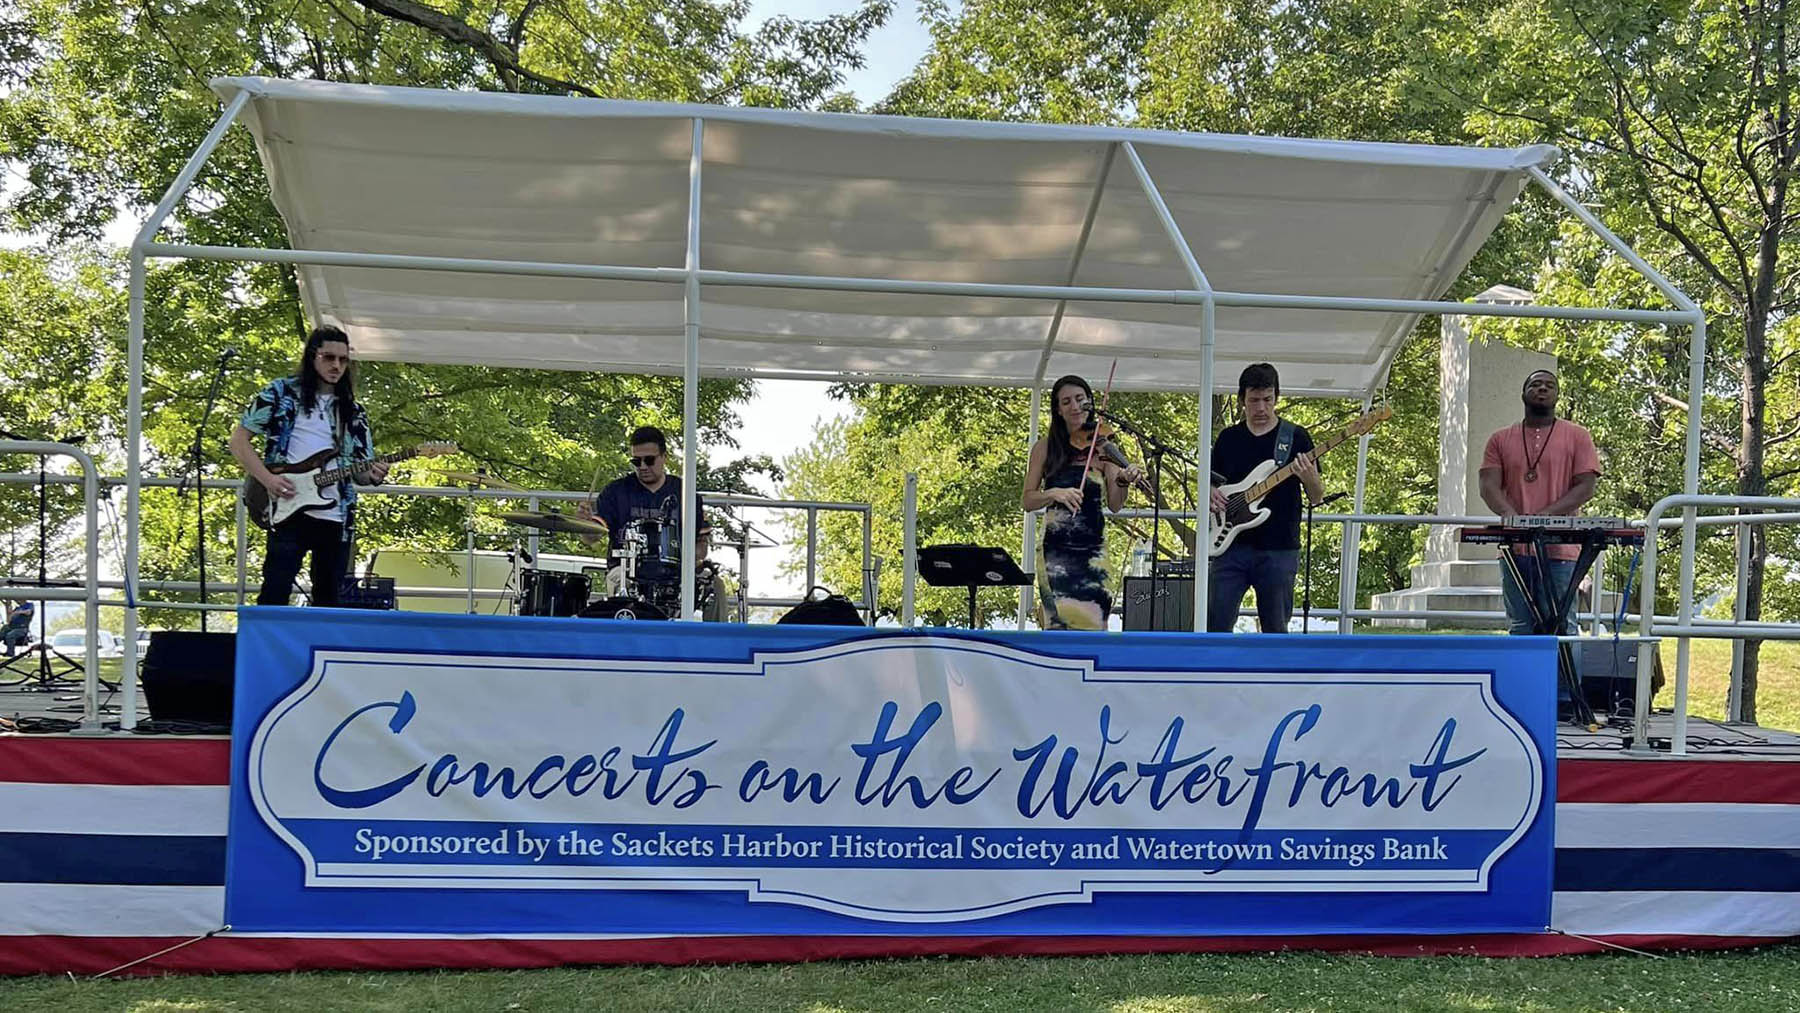 Photo from one of the 2023 Concerts on the Waterfront with the band on stage at the Sackets Harbor Battlefield